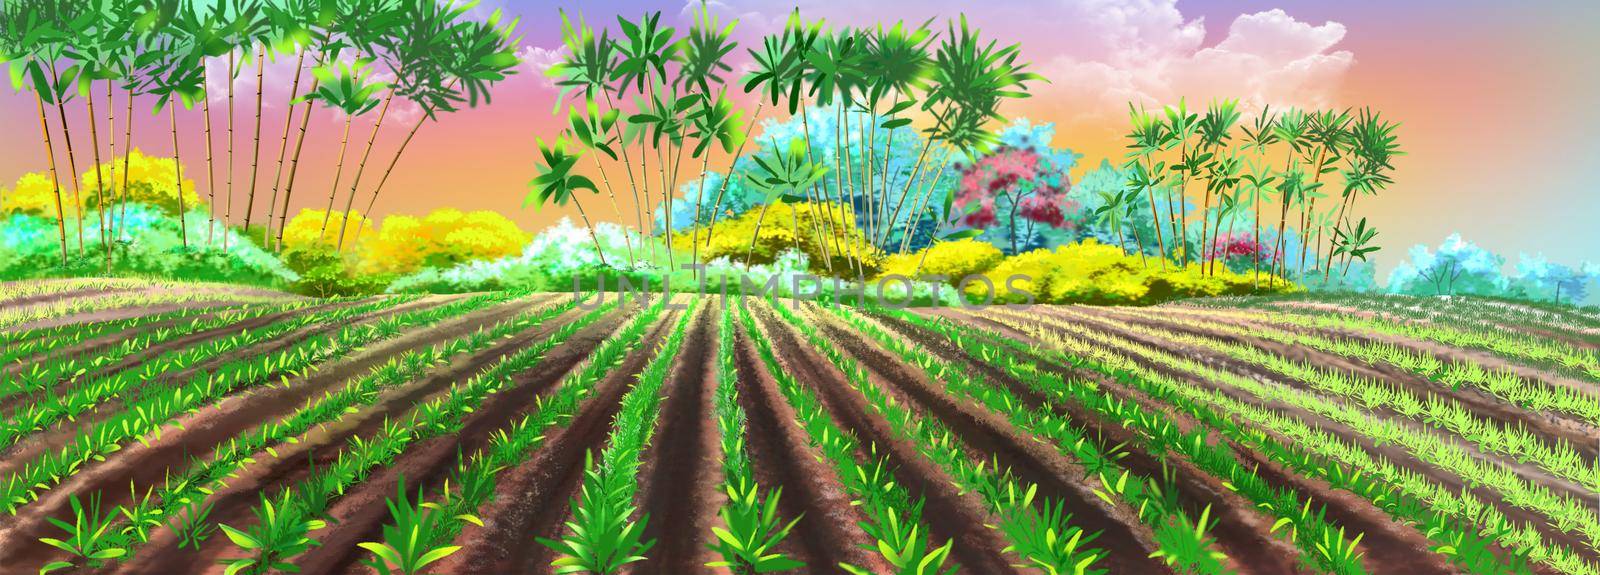 Rice field on a sunny day illustration by Multipedia